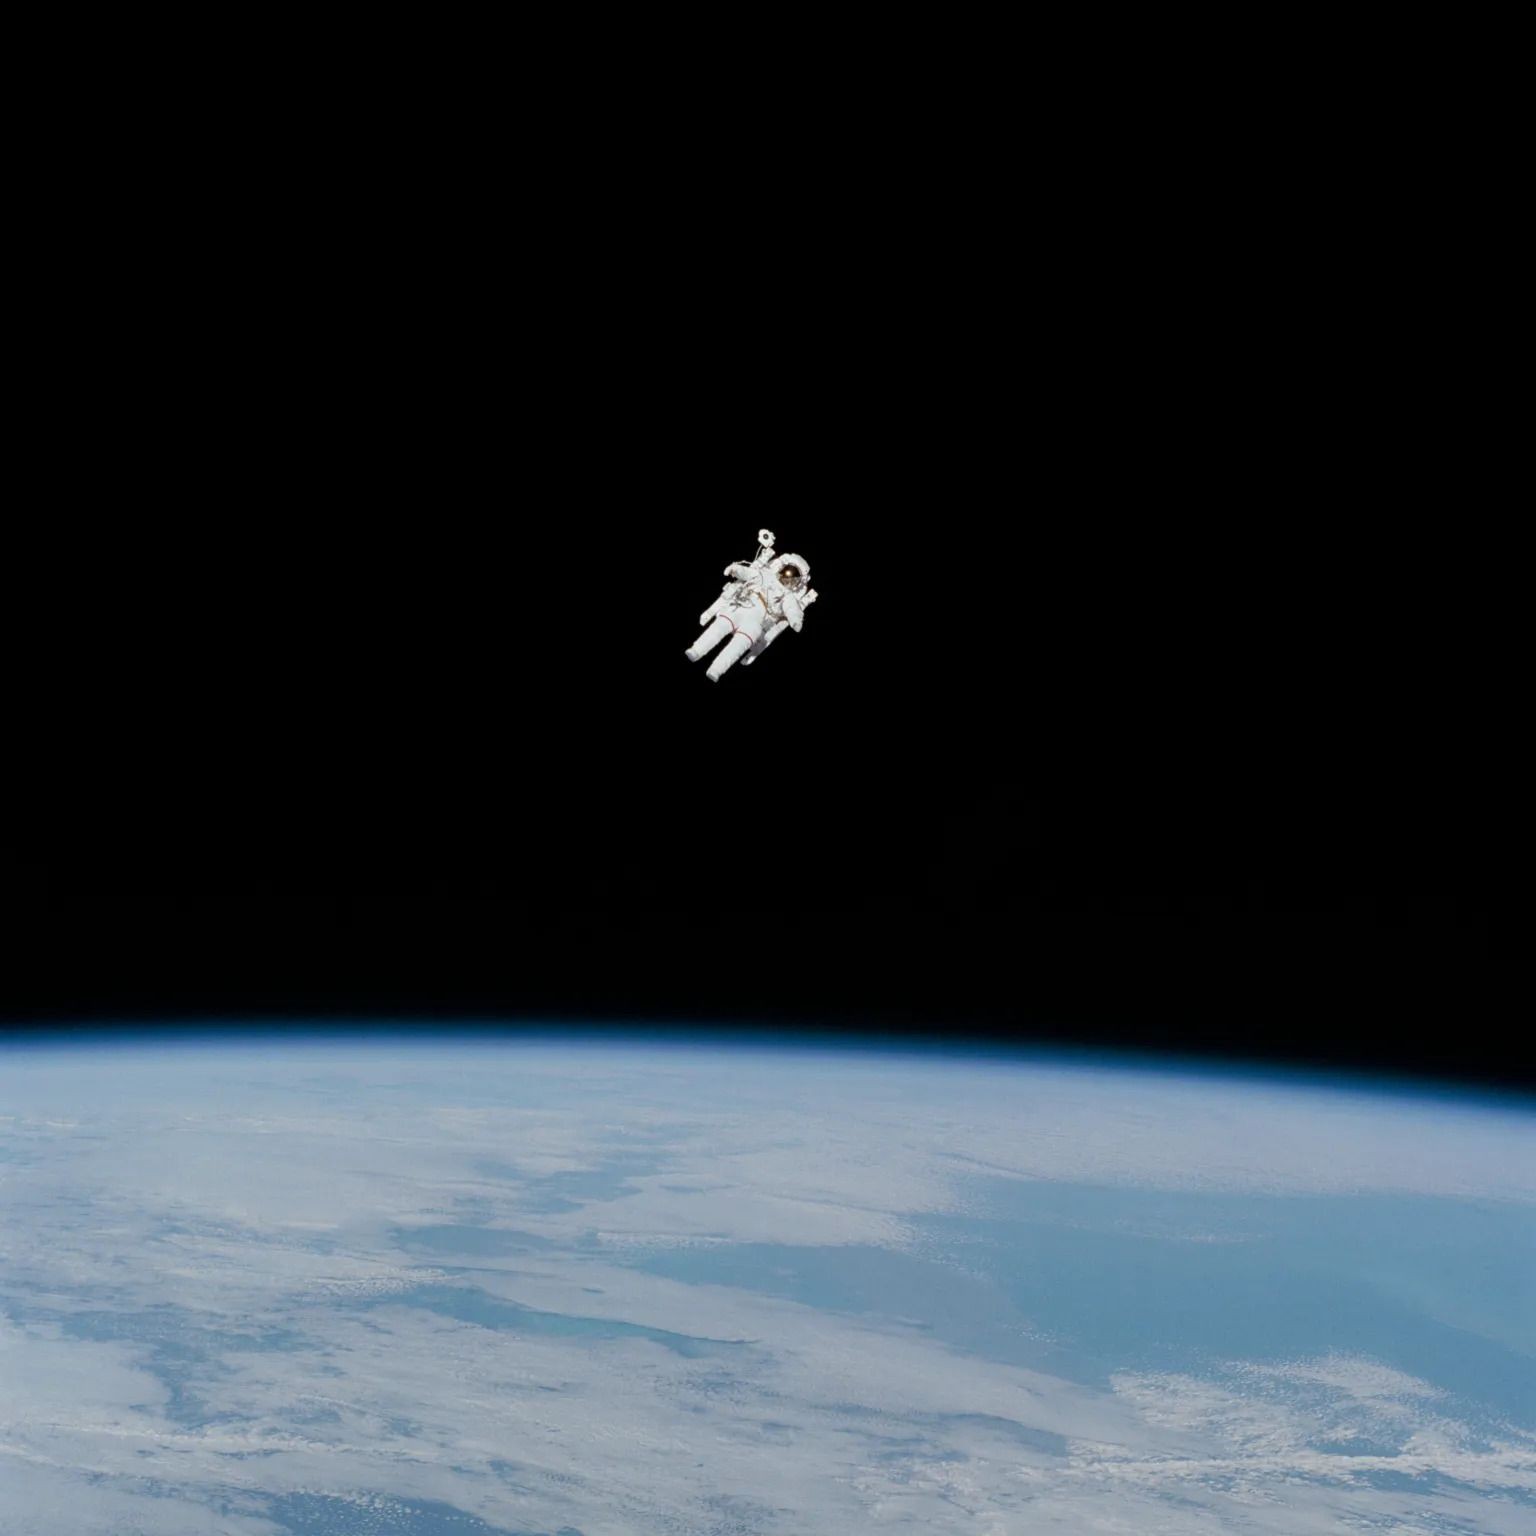 Who is Bruce McCandless?